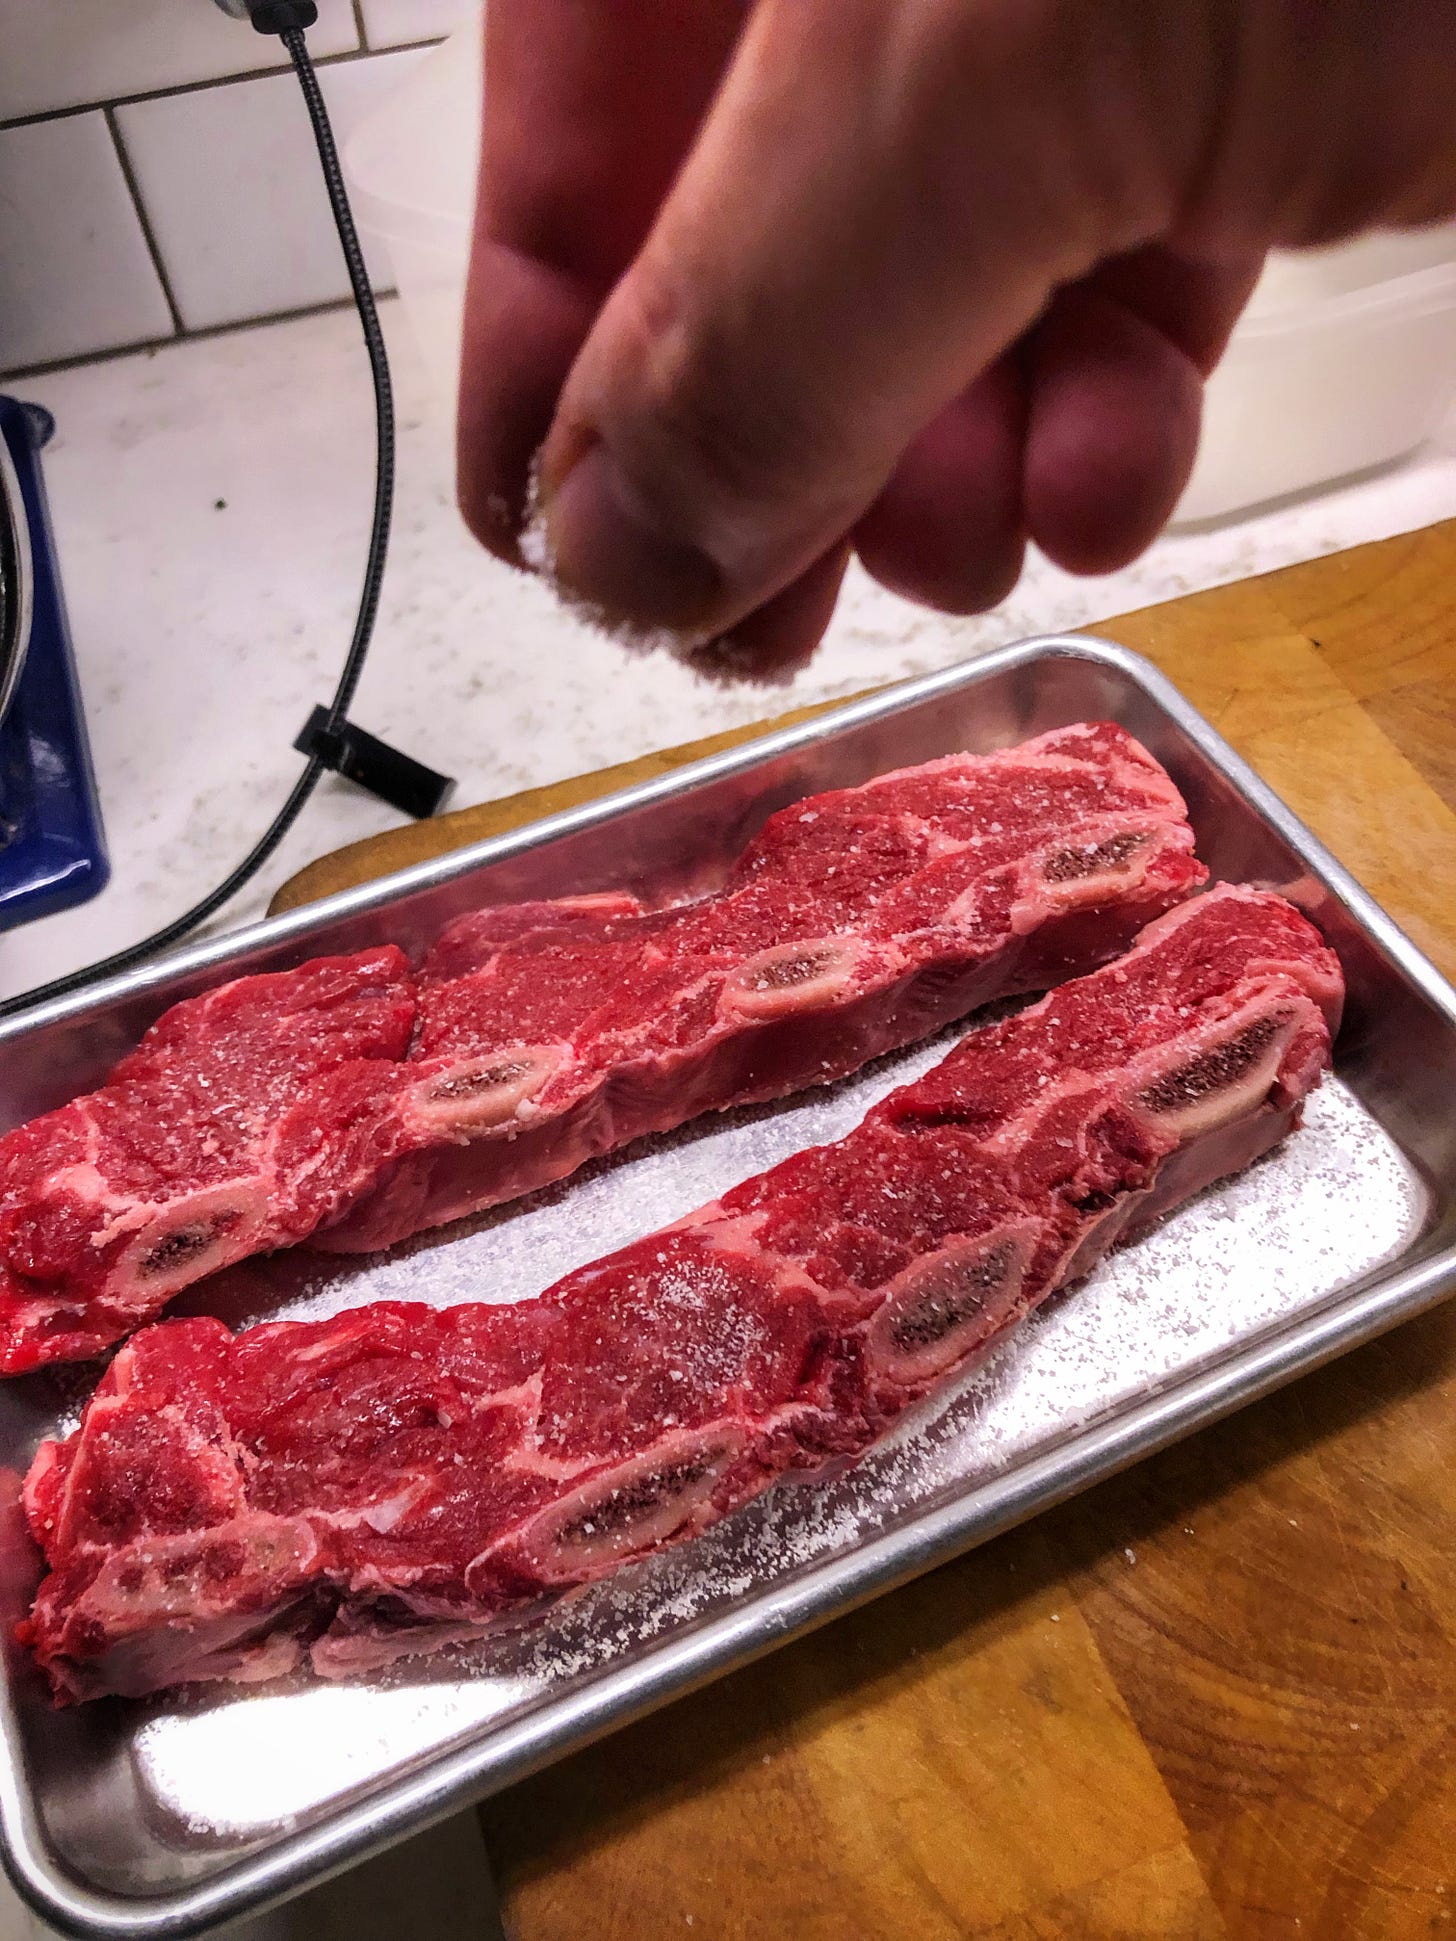 The short ribs are not on the salted sheet tray. The hand sprinkles salt onto the surface of the meat.